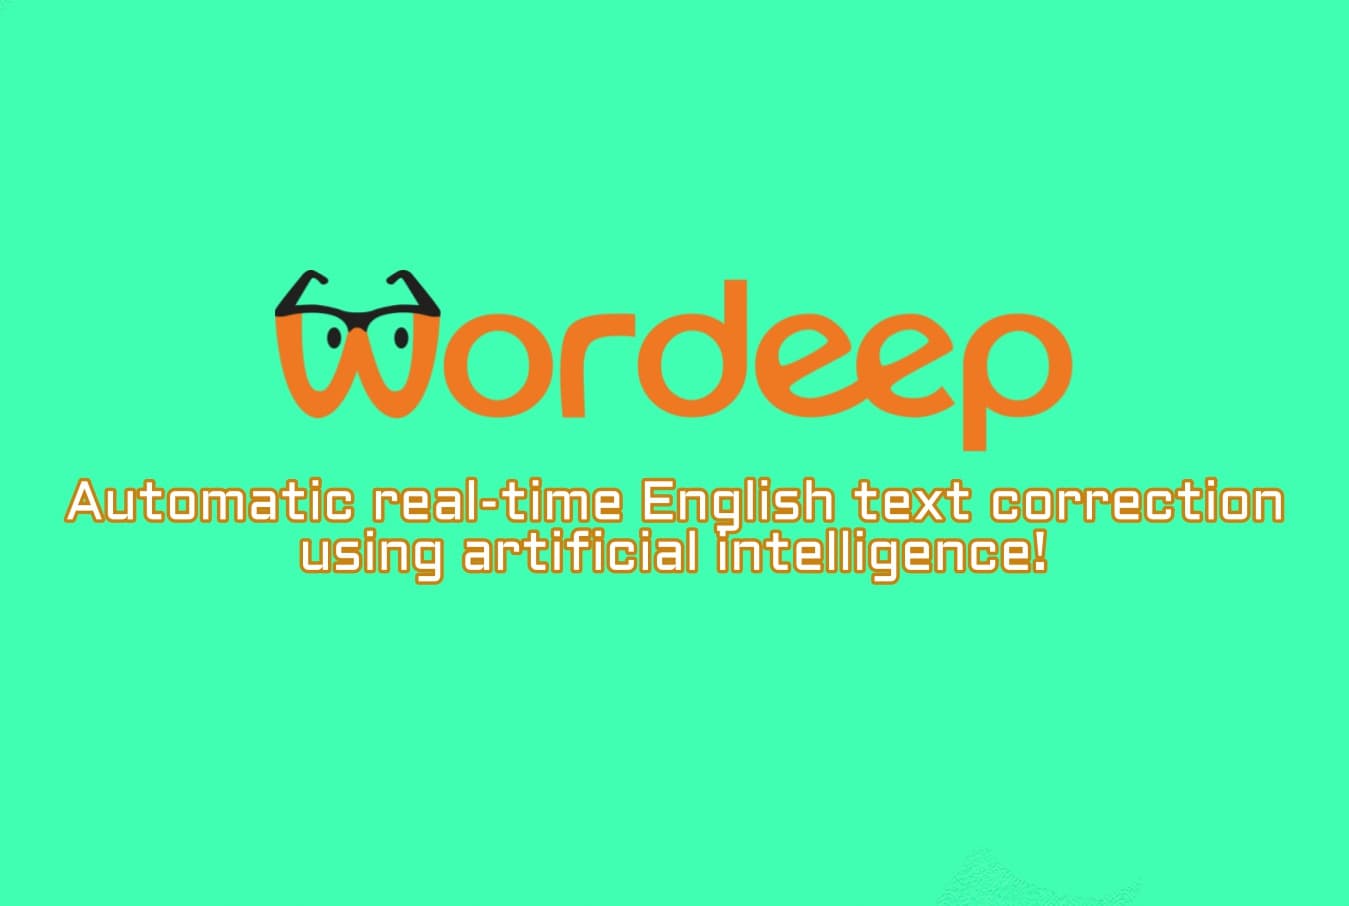 How to become a better writer with Wordeep using artificial intelligence